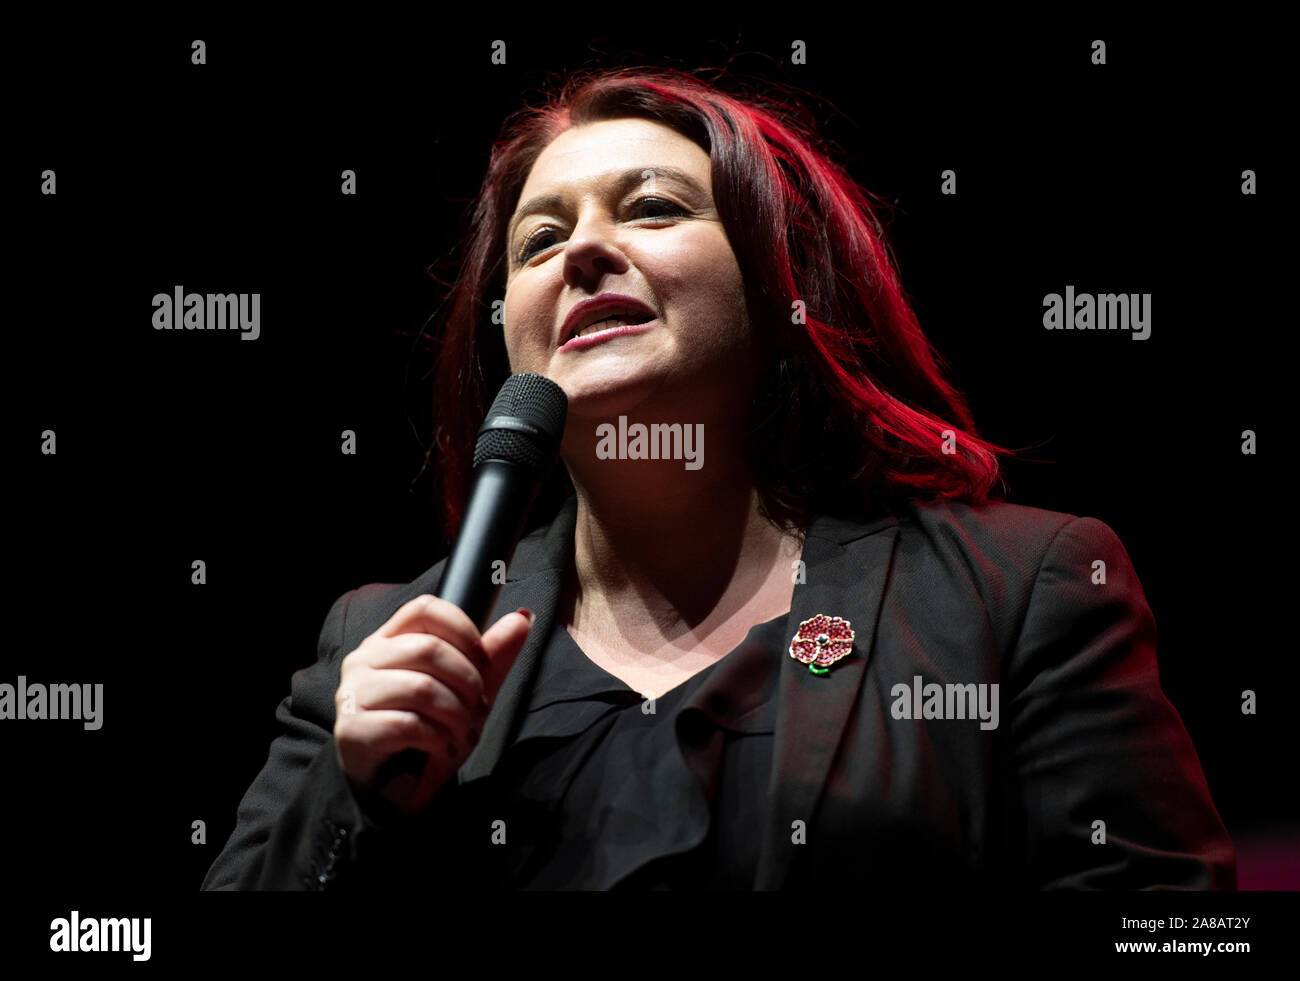 Manchester, UK. 7th November 2019. Paula Barker, Parliamentary Candidate for Liverpool Wavertree, speaks at the Labour General Election Rally held at the O2 Apollo in Ardwick, Manchester. © Russell Hart/Alamy Live News. Stock Photo